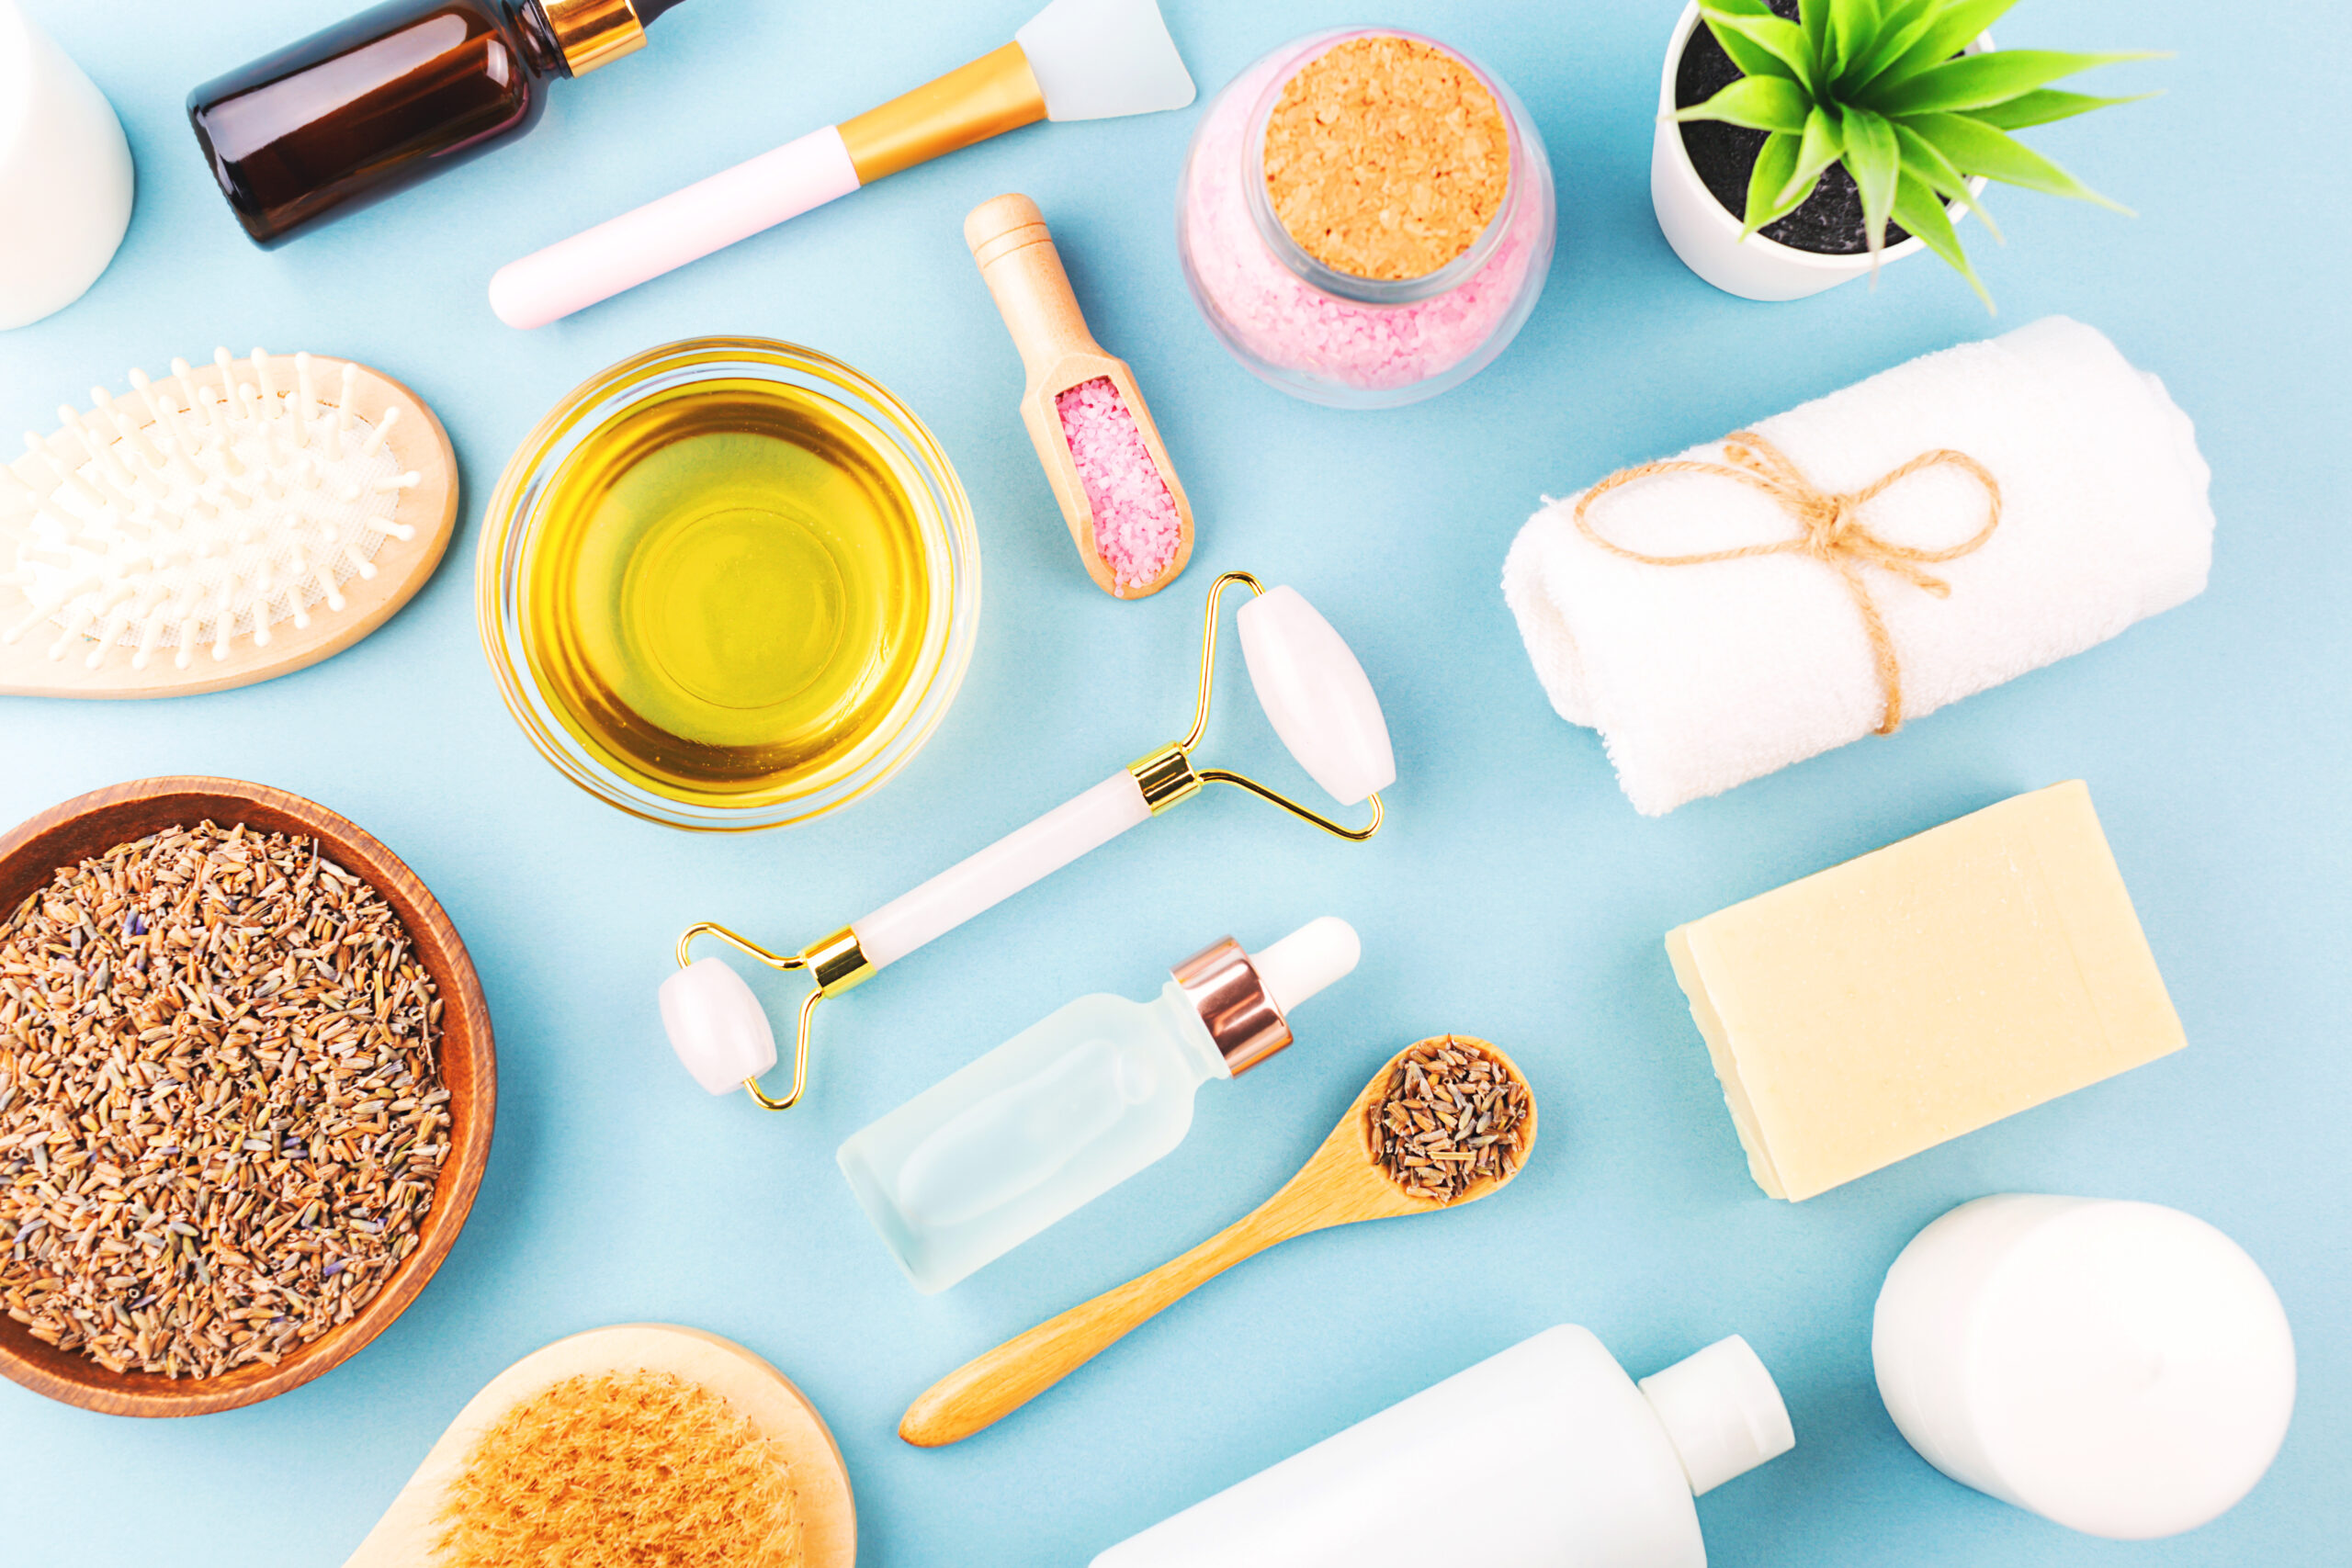 4 Easy Steps to Detox Your Beauty Products